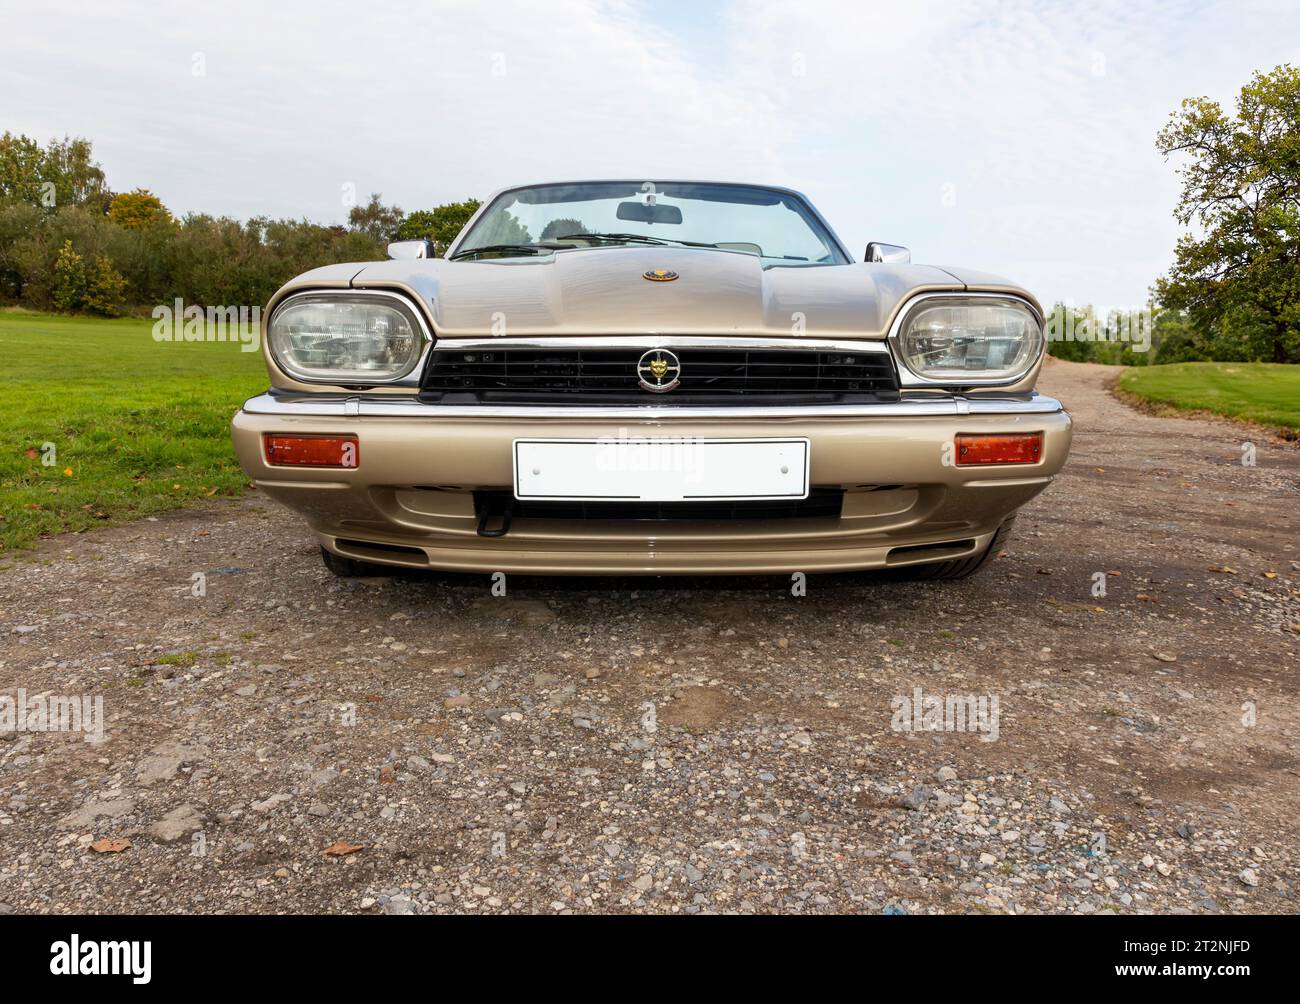 Low viewpoint of the front of a convertible Jaguar XJS with top down on a gravel car park in the country Stock Photo